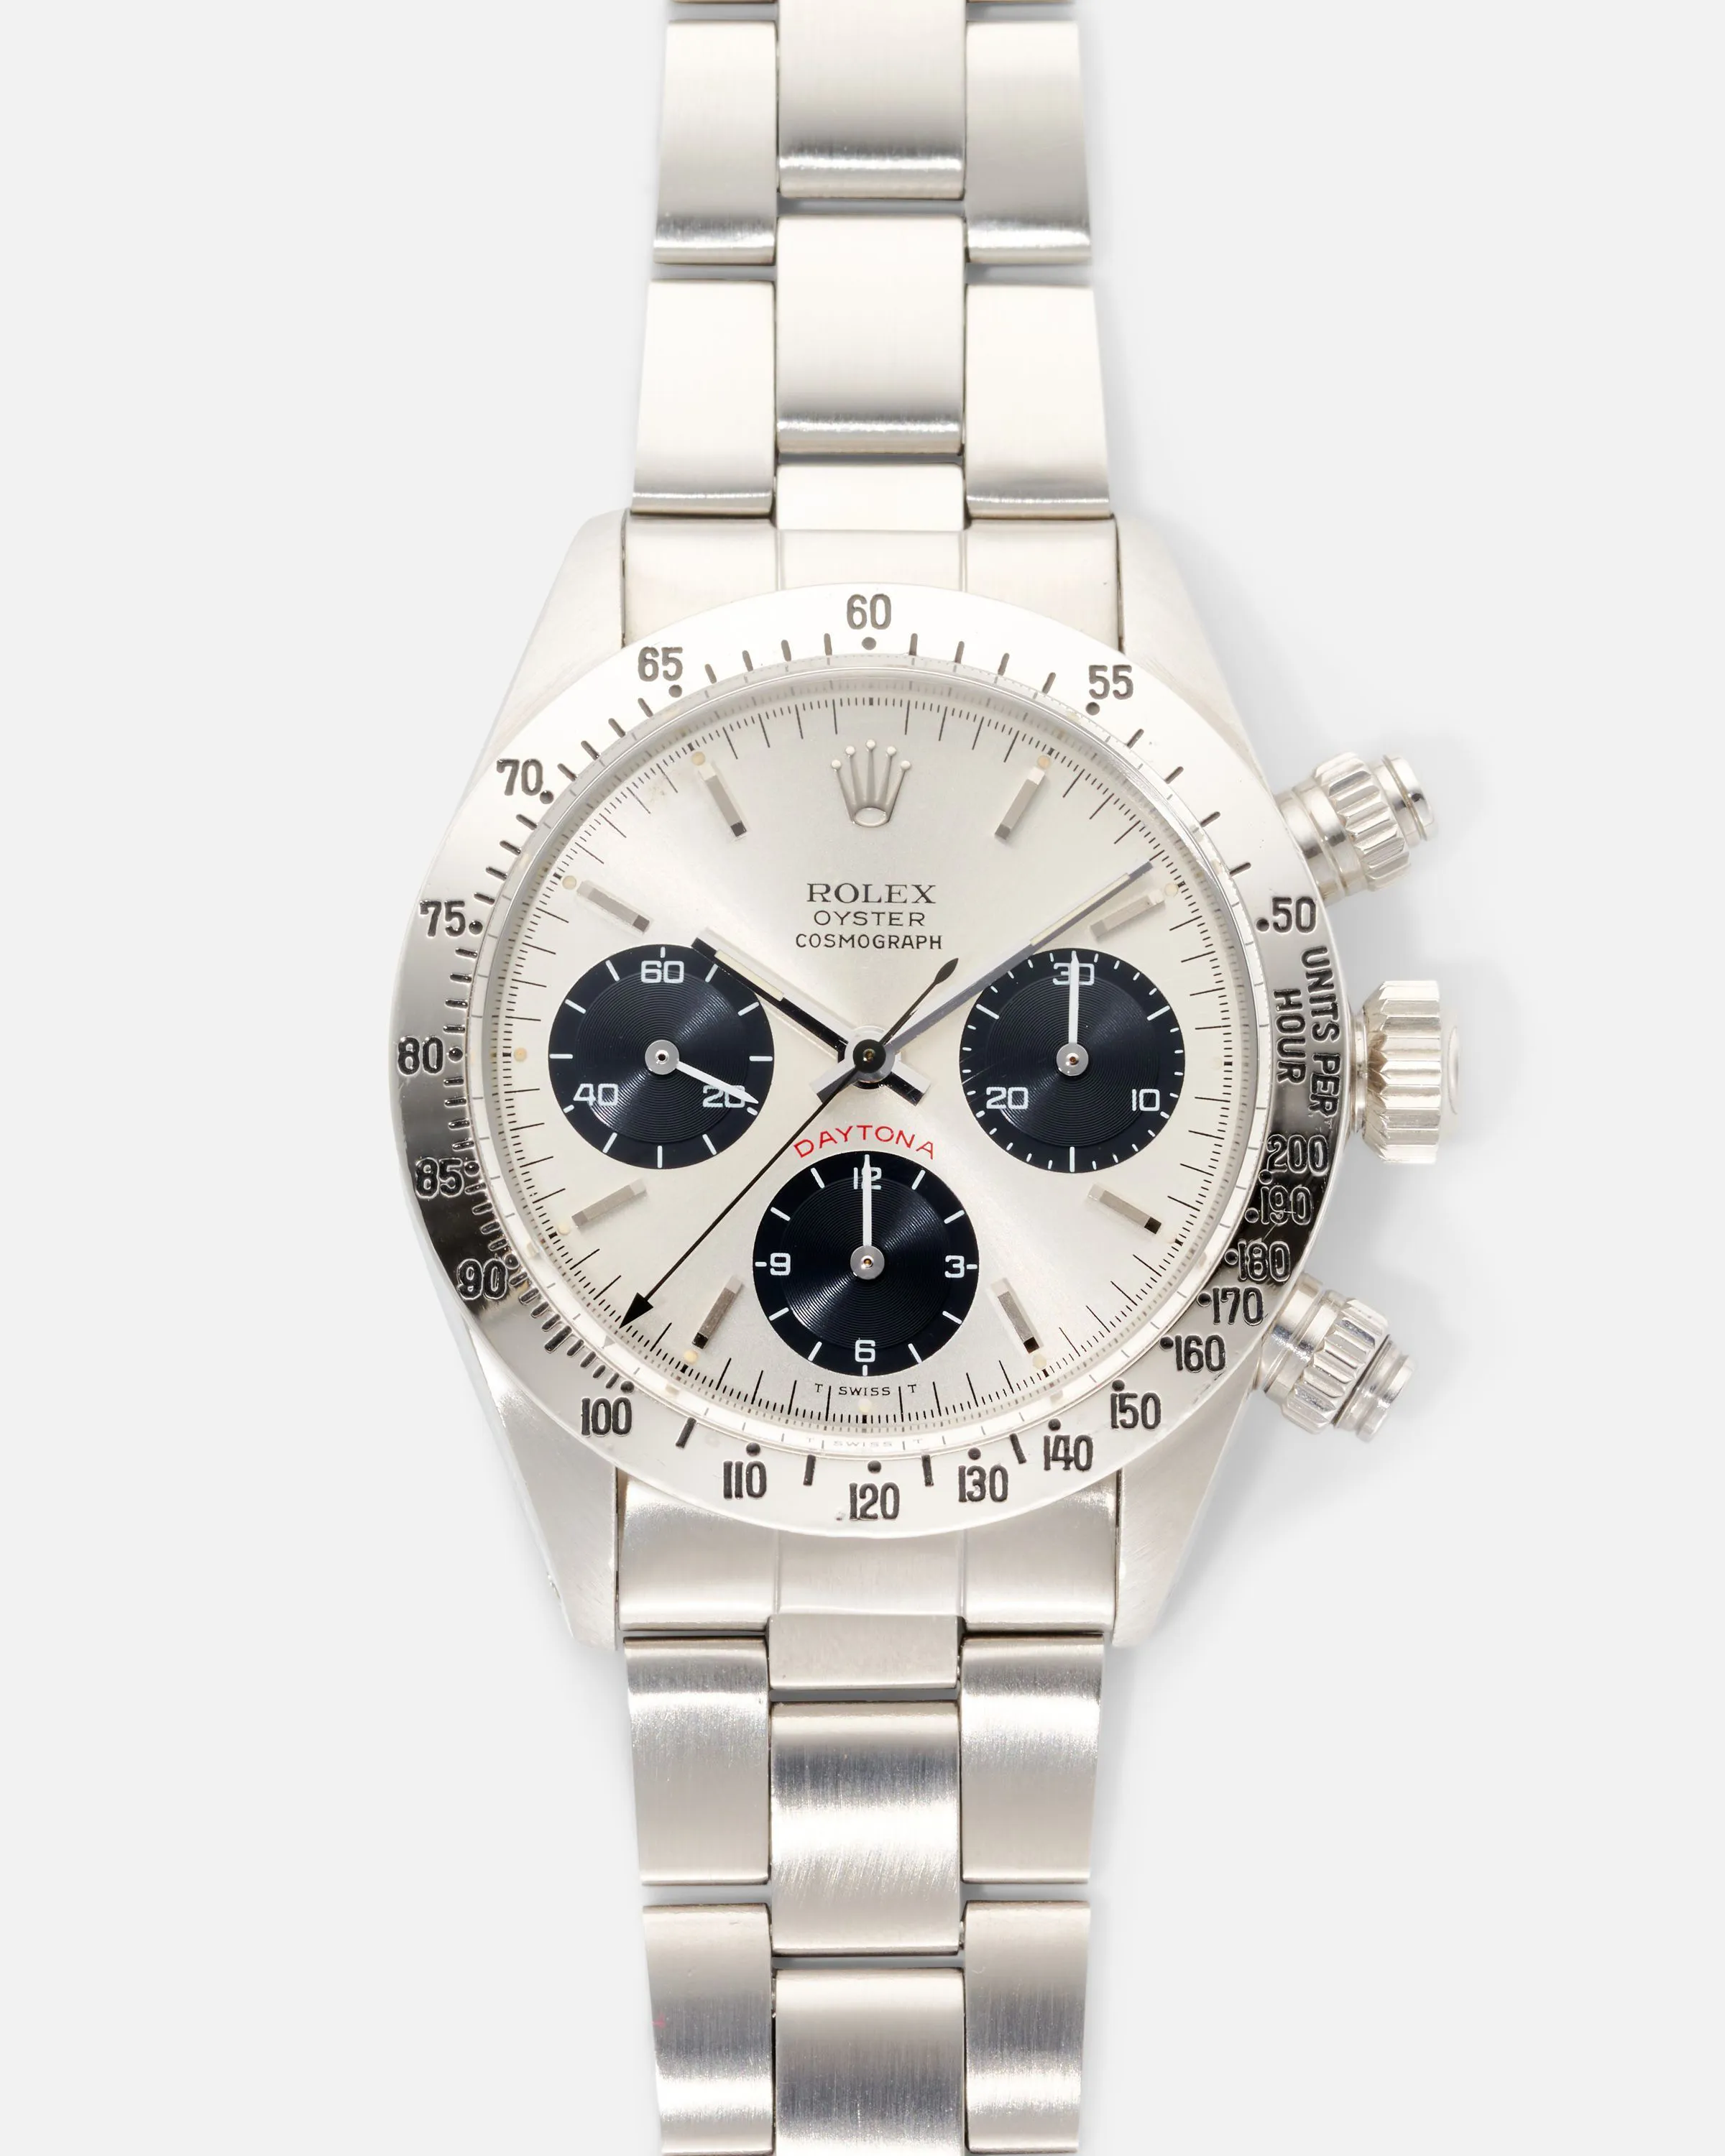 Rolex Chronograph 6265/0 37mm Stainless steel